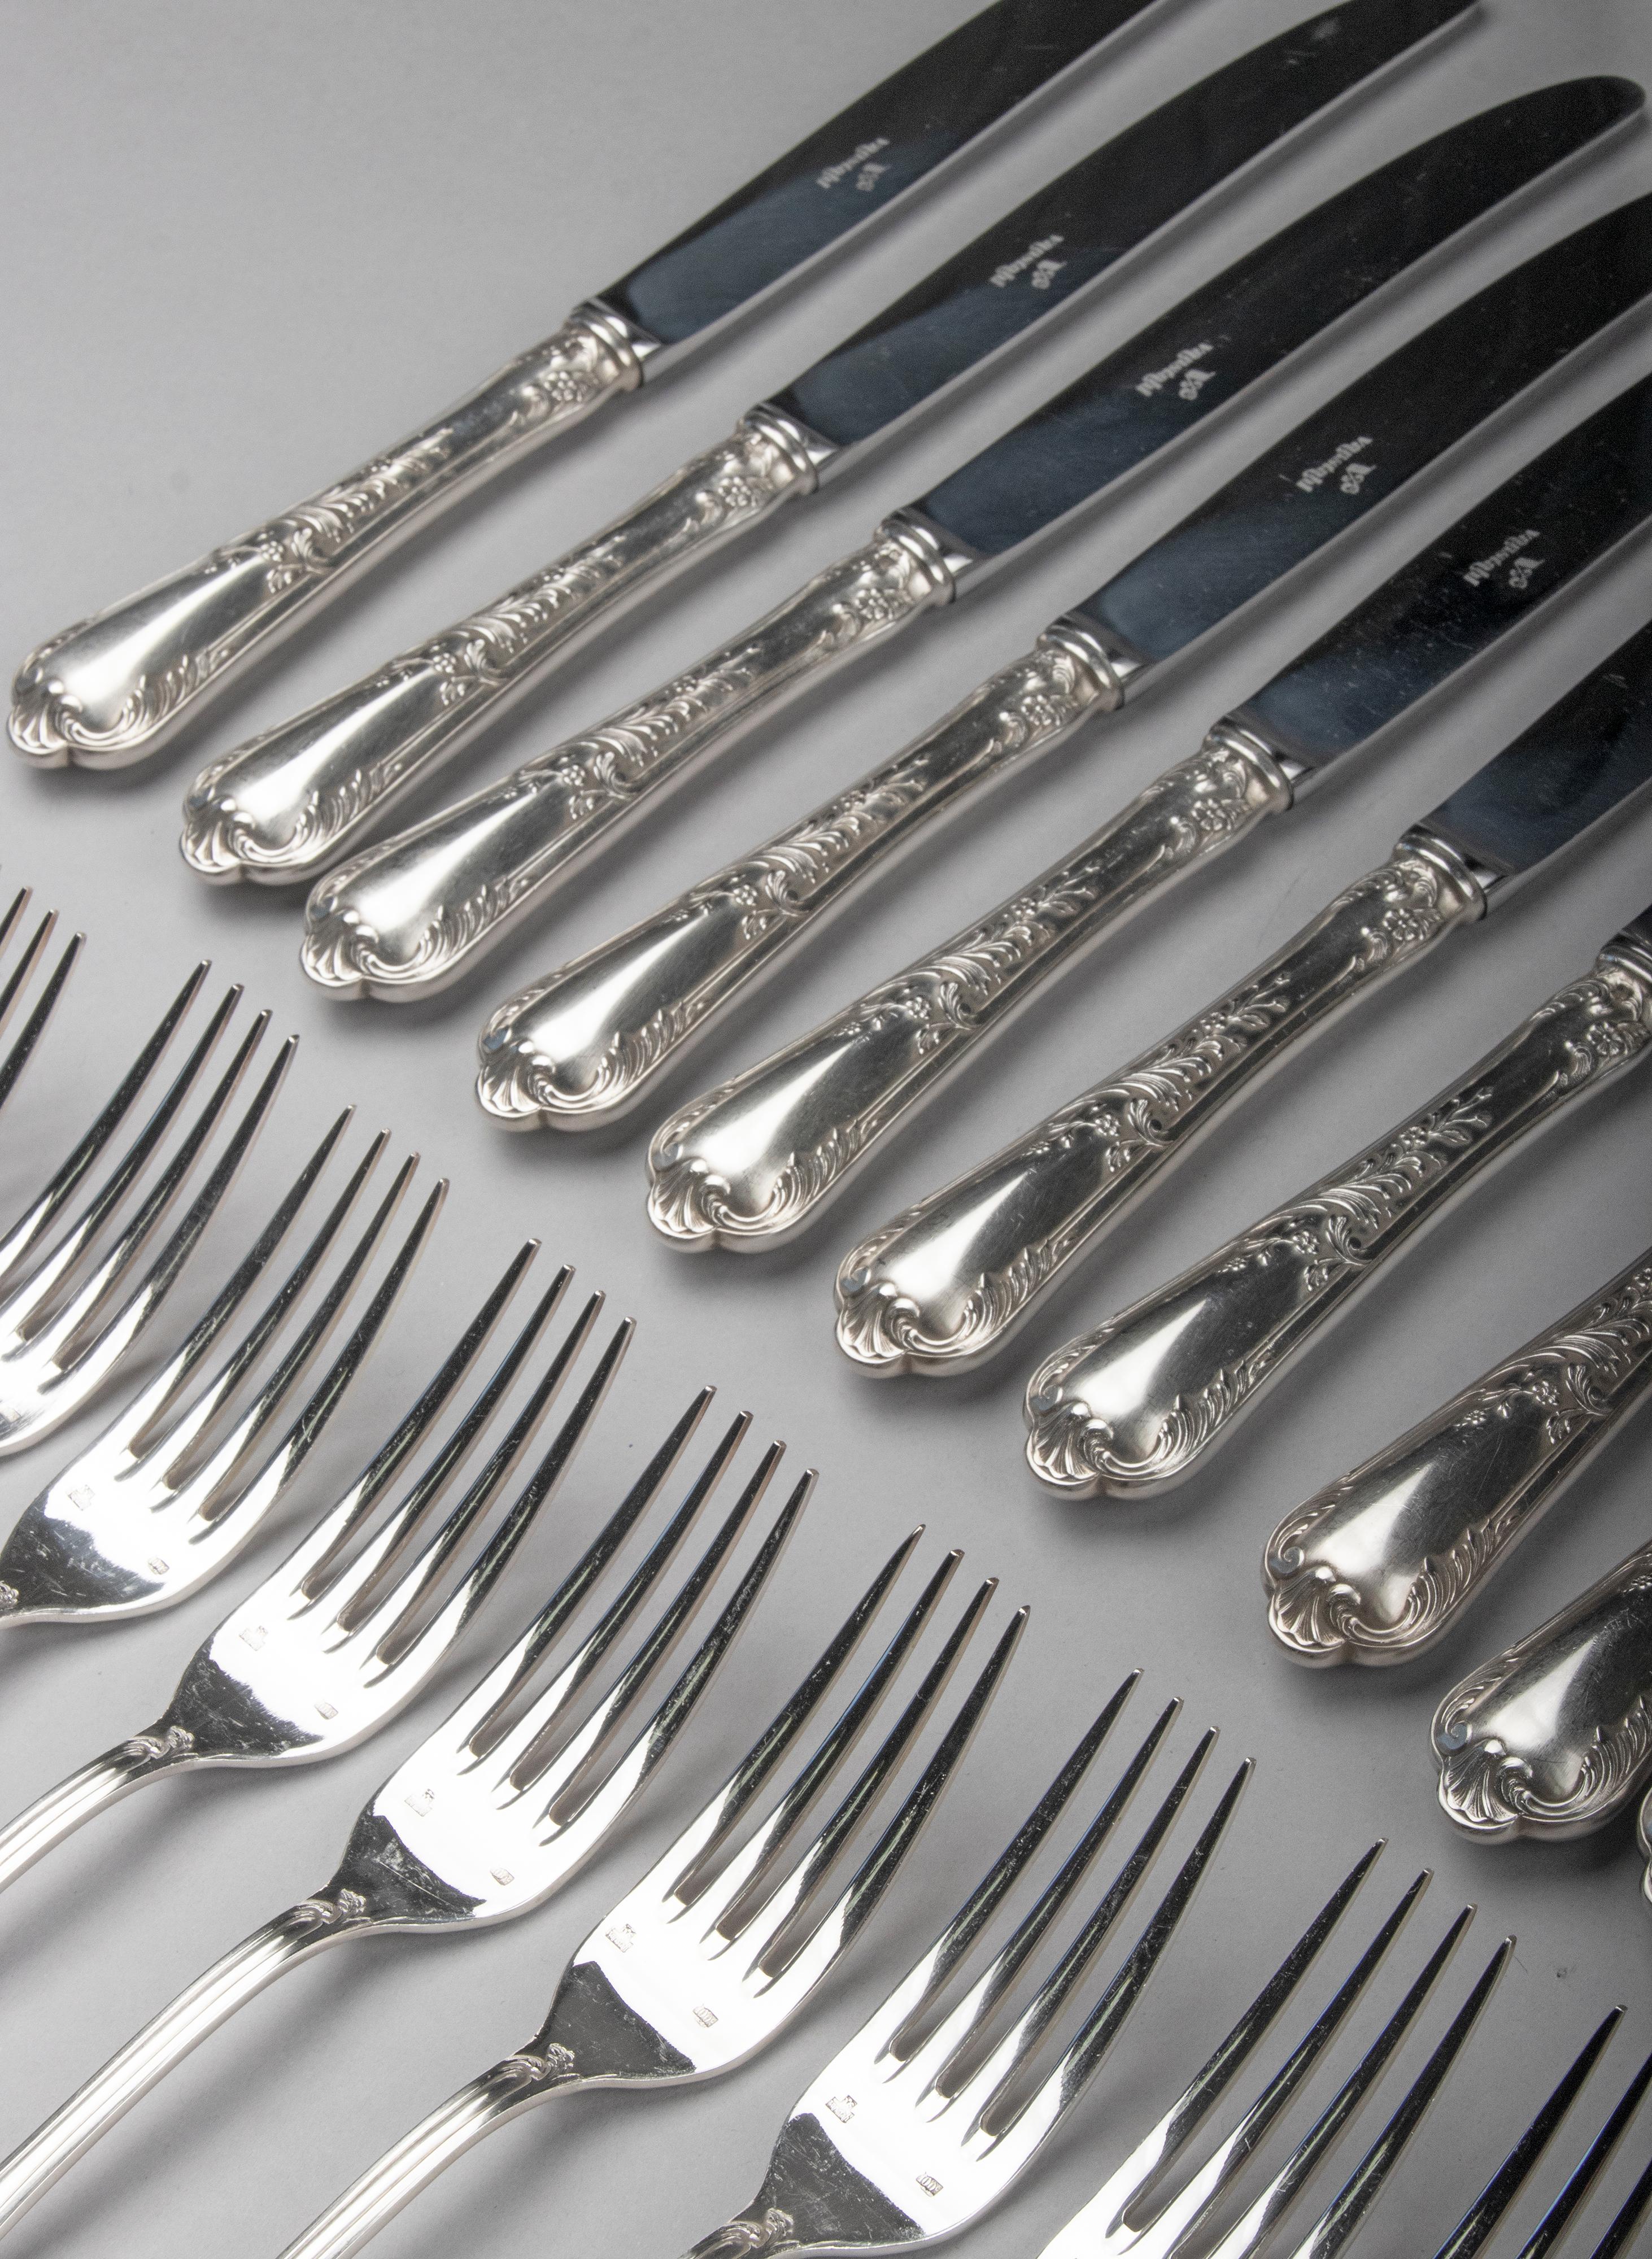 102-Piece Silver-Plated Flatware Set Made by Vanstahl Louis XV-Style 6